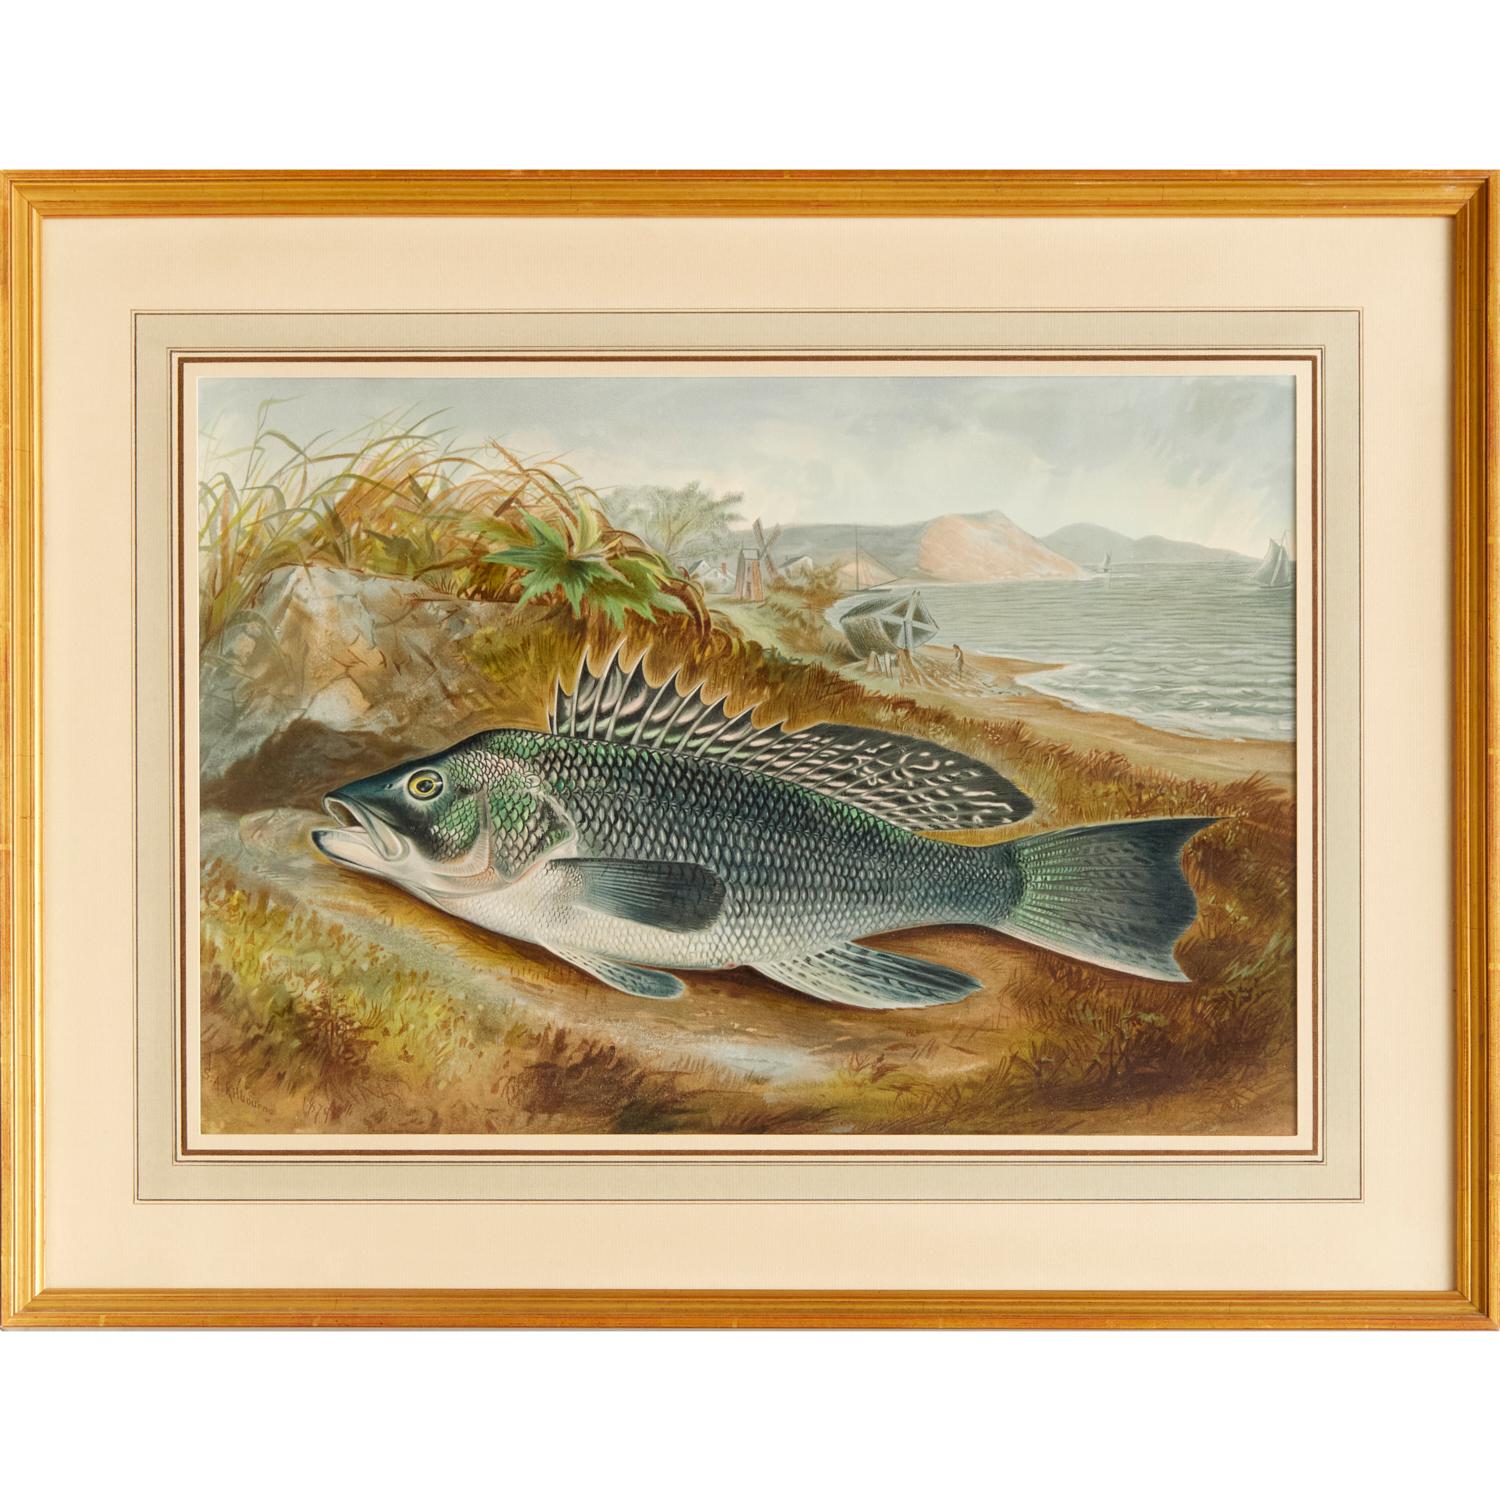 S. A. Kilbourne: „Game Fishes of the United States“, 6 gerahmte Chromolithographien  (Glas) im Angebot